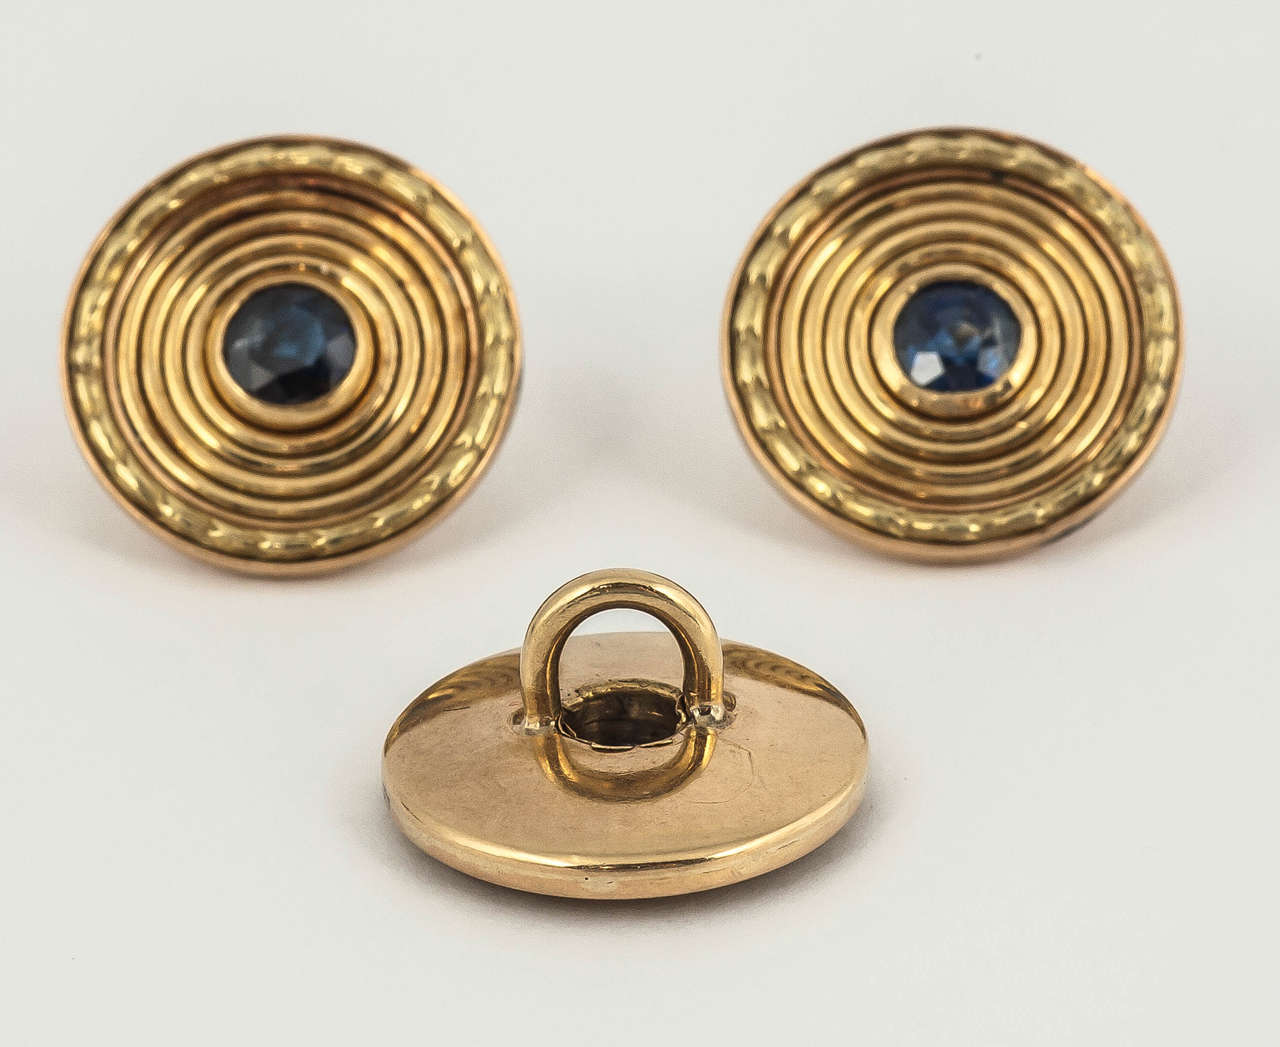 A heavy pair of 18 ct yellow gold cufflinks and three matching buttons with a faceted sapphire centre, bordered in green gold, one side slightly smaller than the other. C 1950